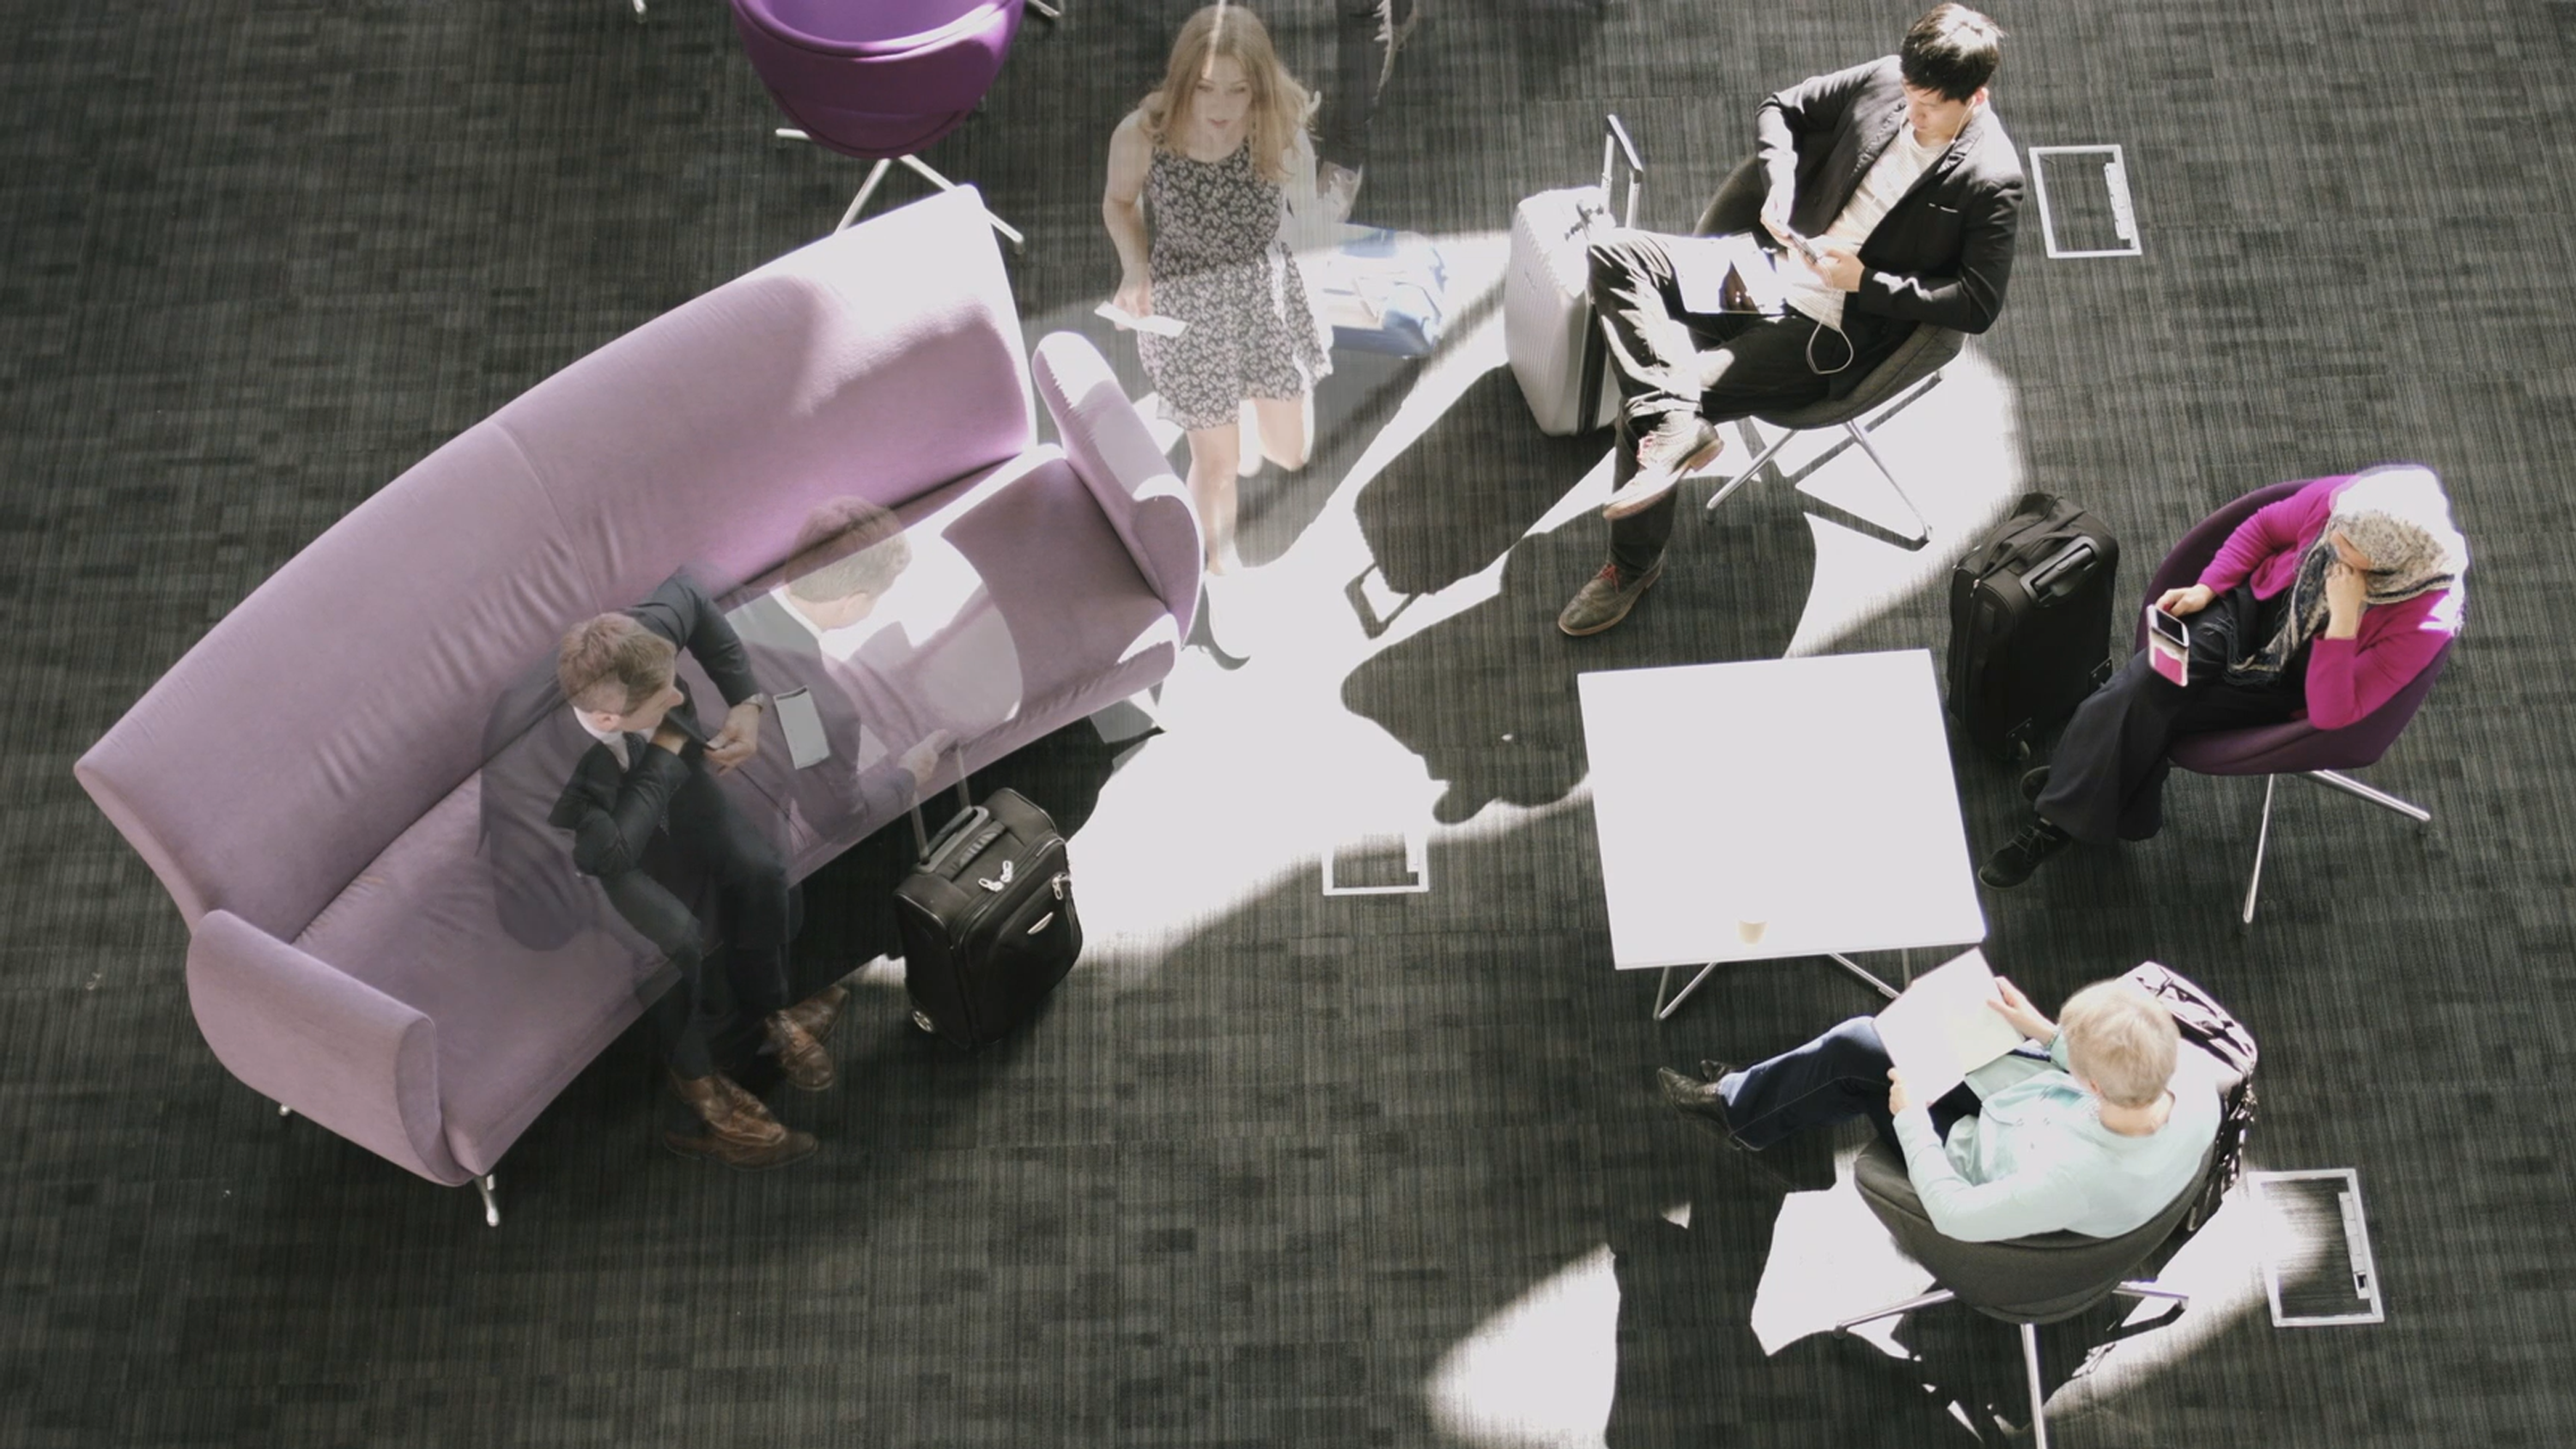 An overhead image of business people at work. A few of them are dissolving out of view.